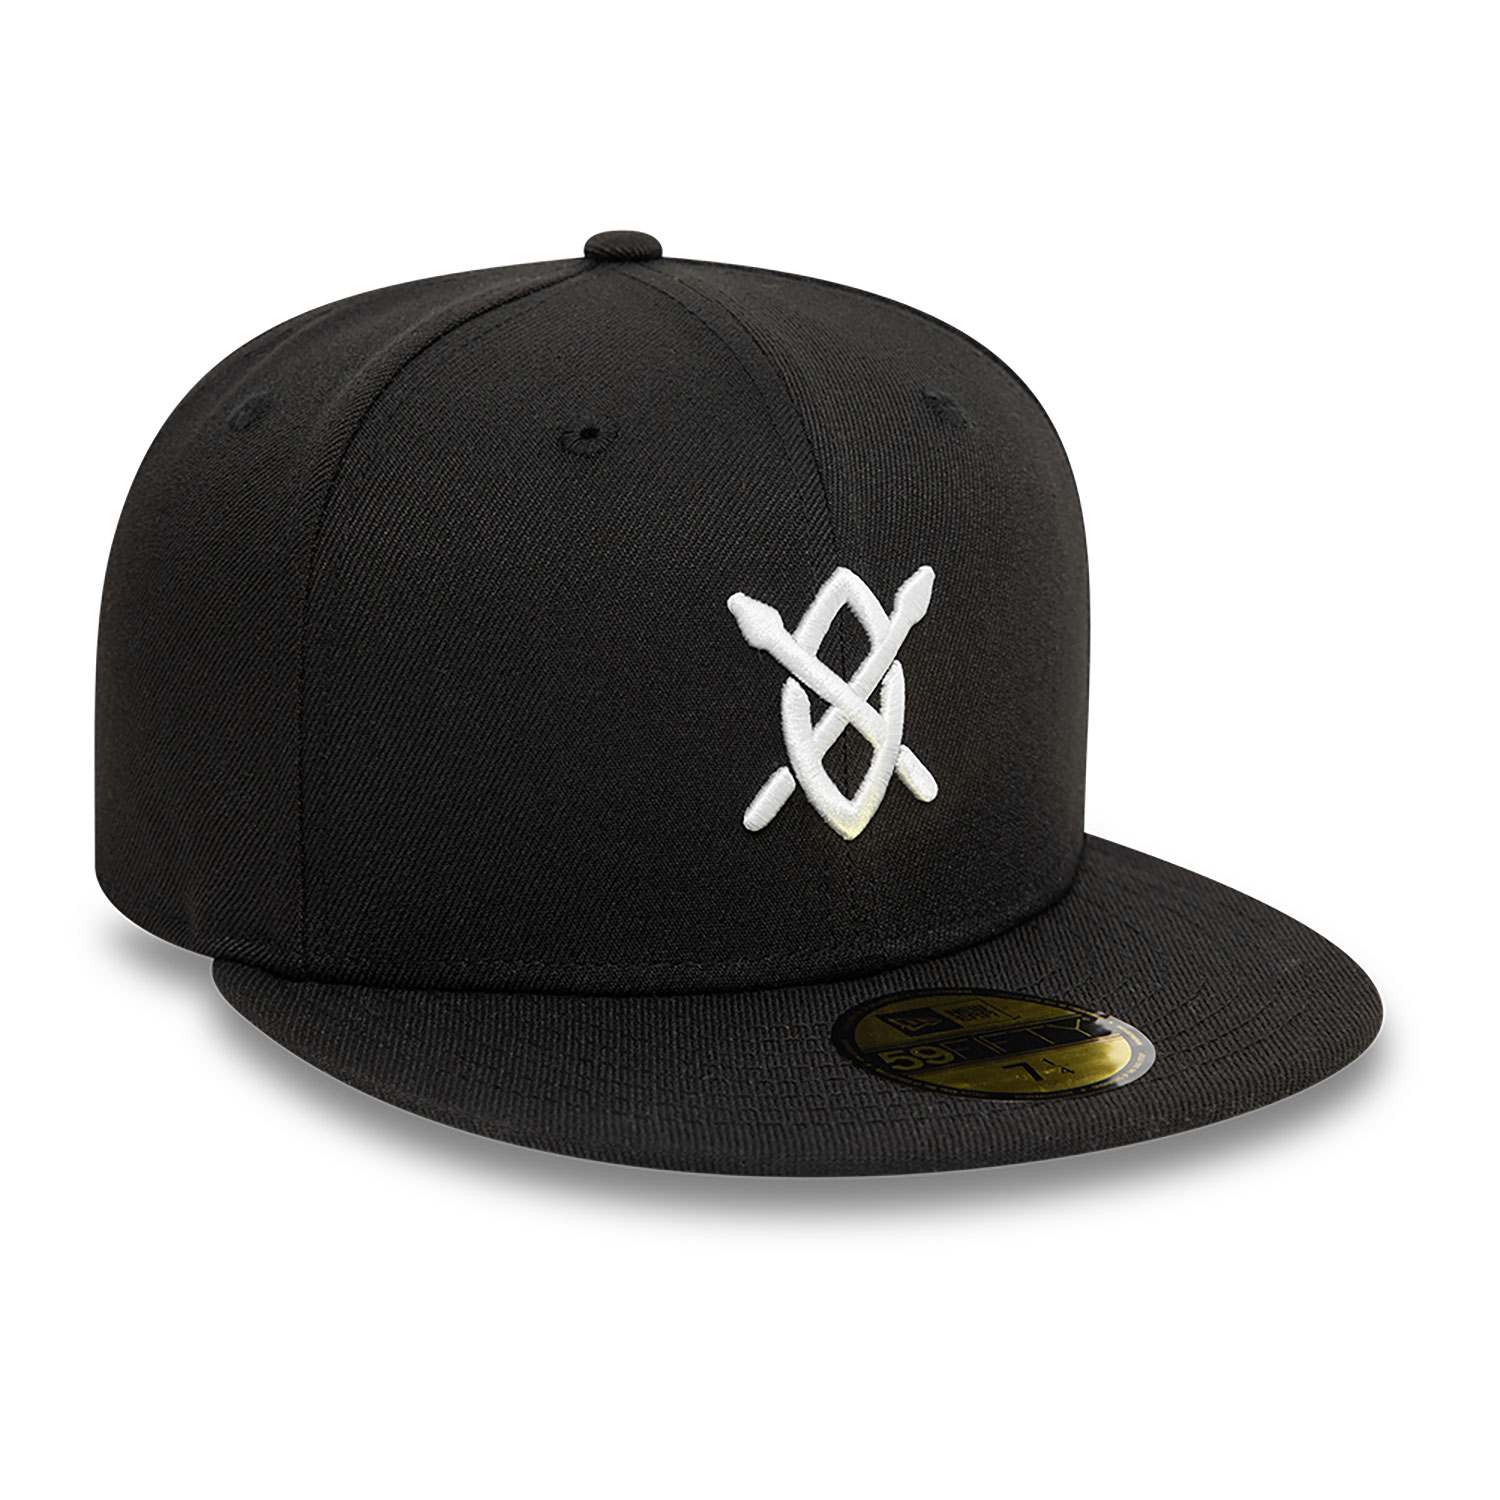 New Era x Daily Paper Black 59FIFTY Fitted Cap